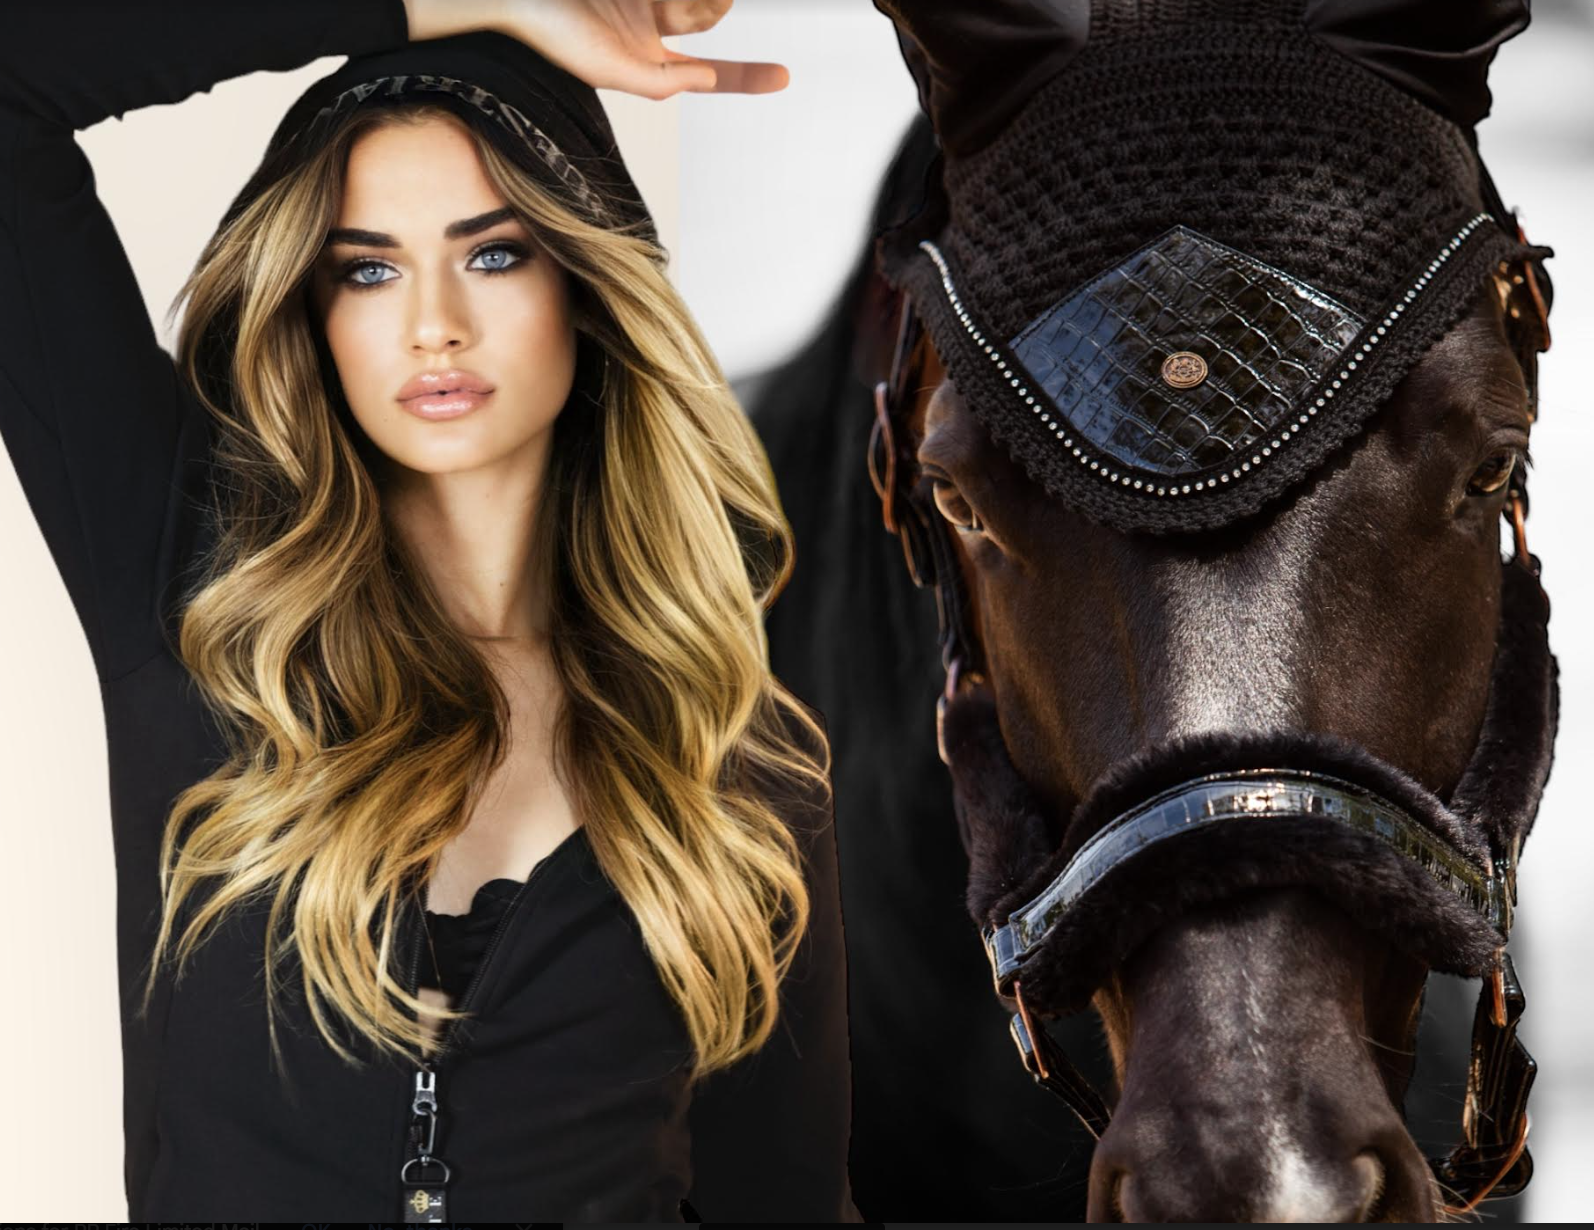 Royal Equestrian Collection Gallops into Macy’s, Making History as the First Equestrian Brand to Grace the Macy’s Marketplace